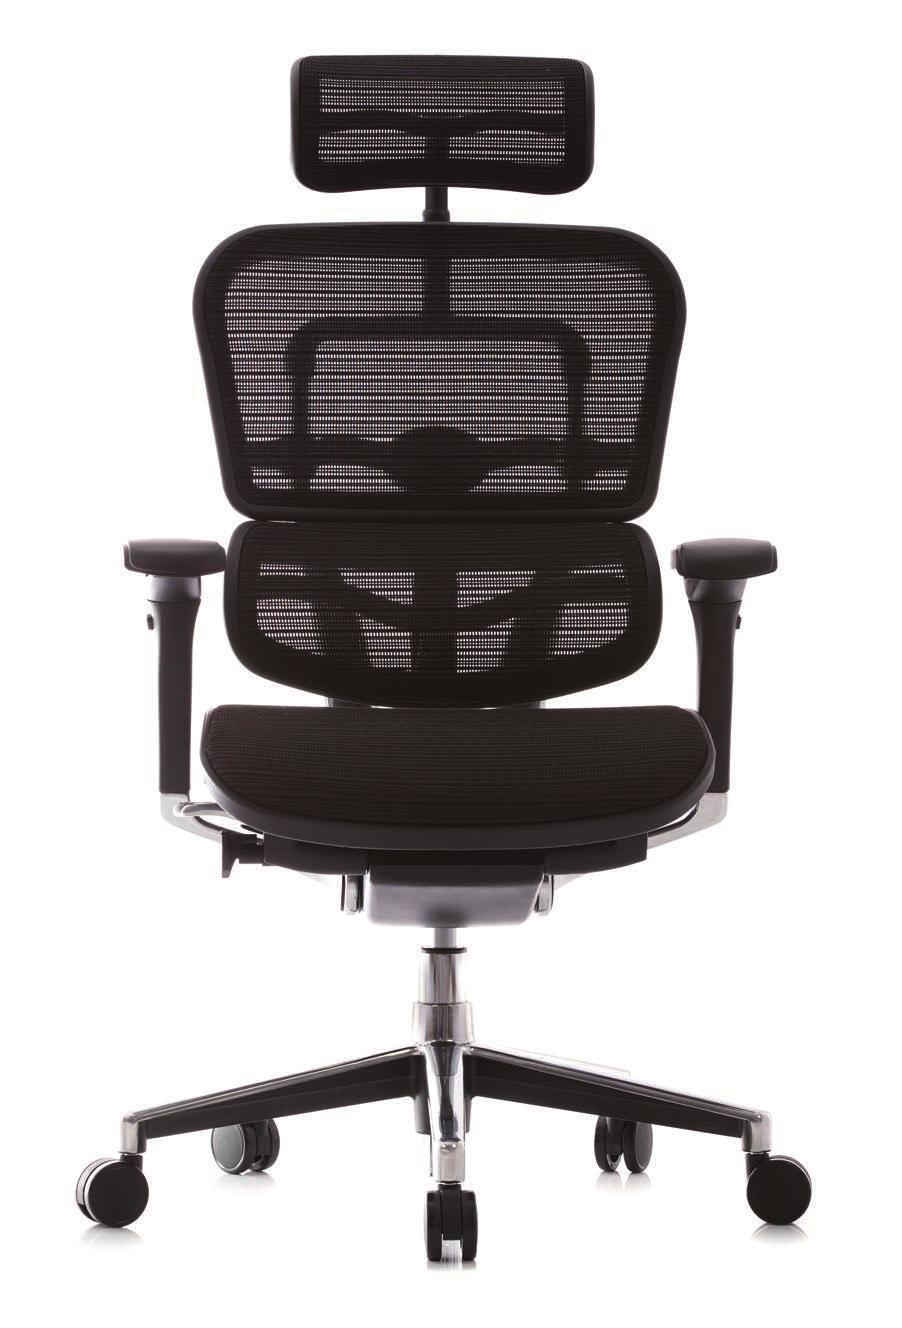 The Ergohuman has been designed specifically for those who are in an office chair for long periods of time and require "Intensive Use Seating" for comfort.